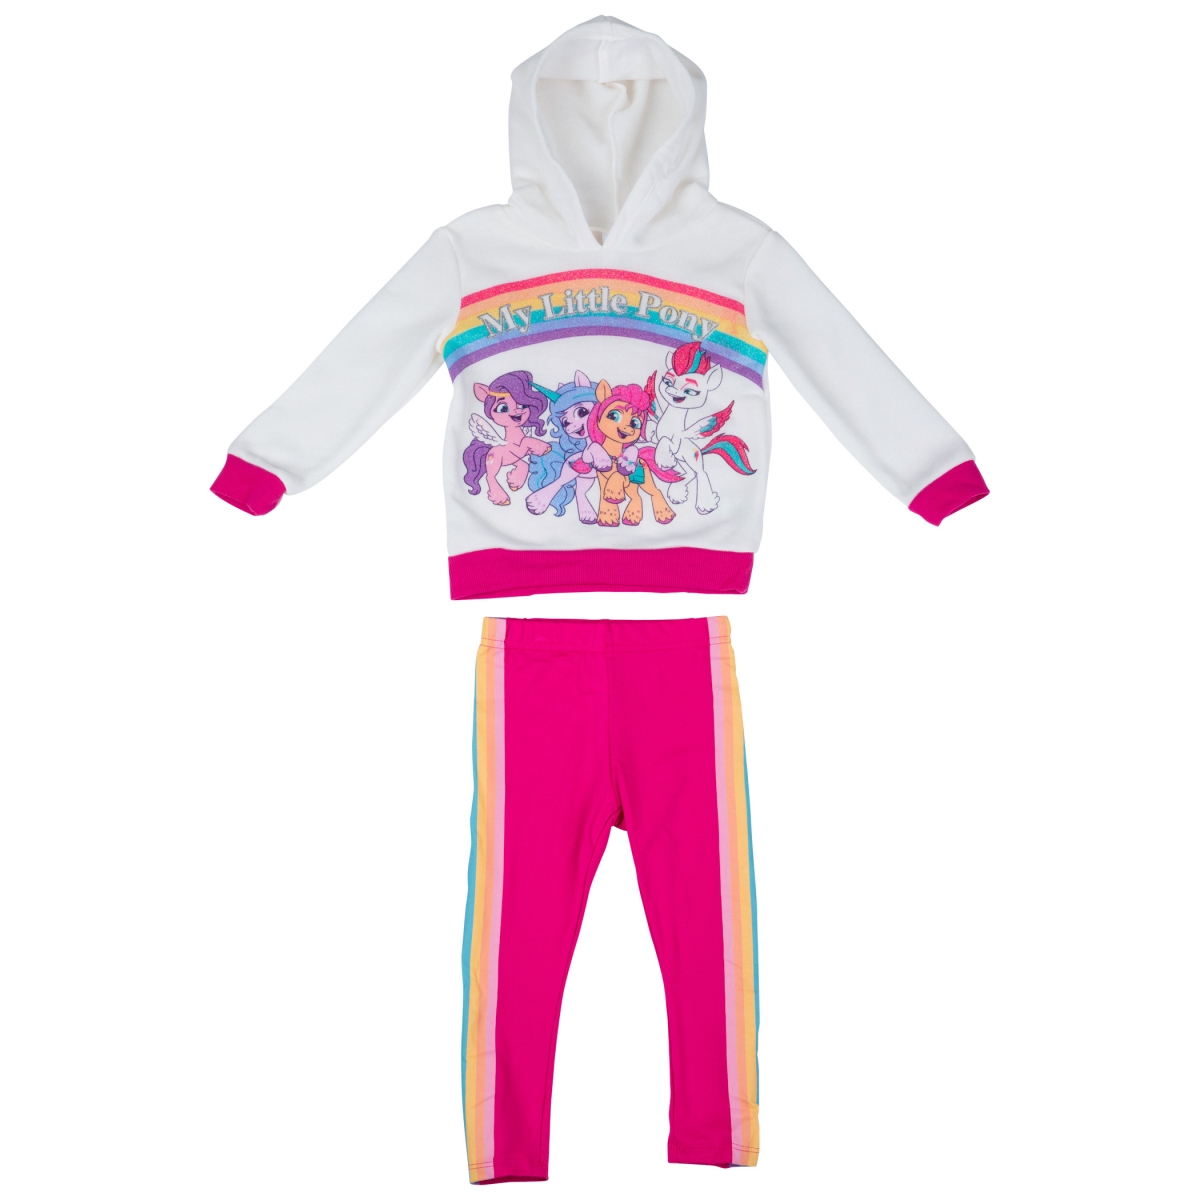 My Little Pony 866336-toddler3t